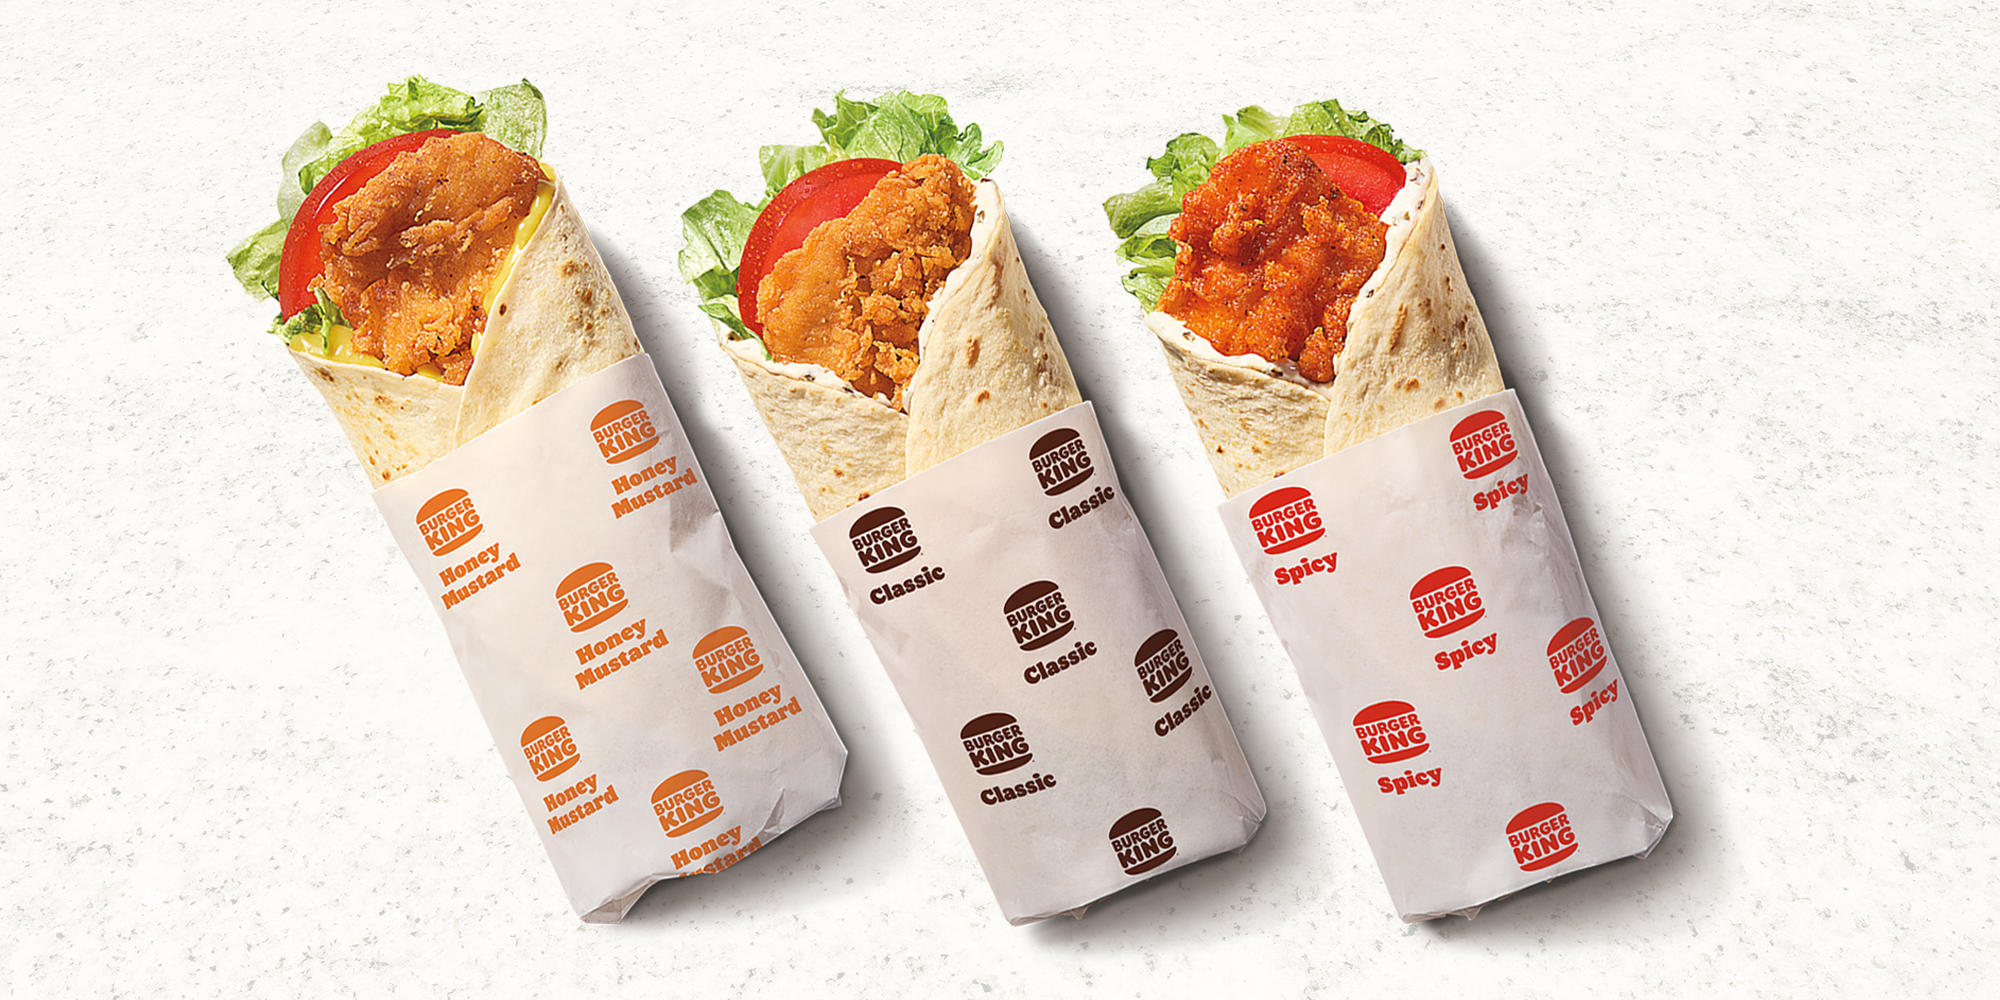 Classic Wrap
Spicy Wrap
Honey Mustard Wrap Burger King Kenner (504)681-9361